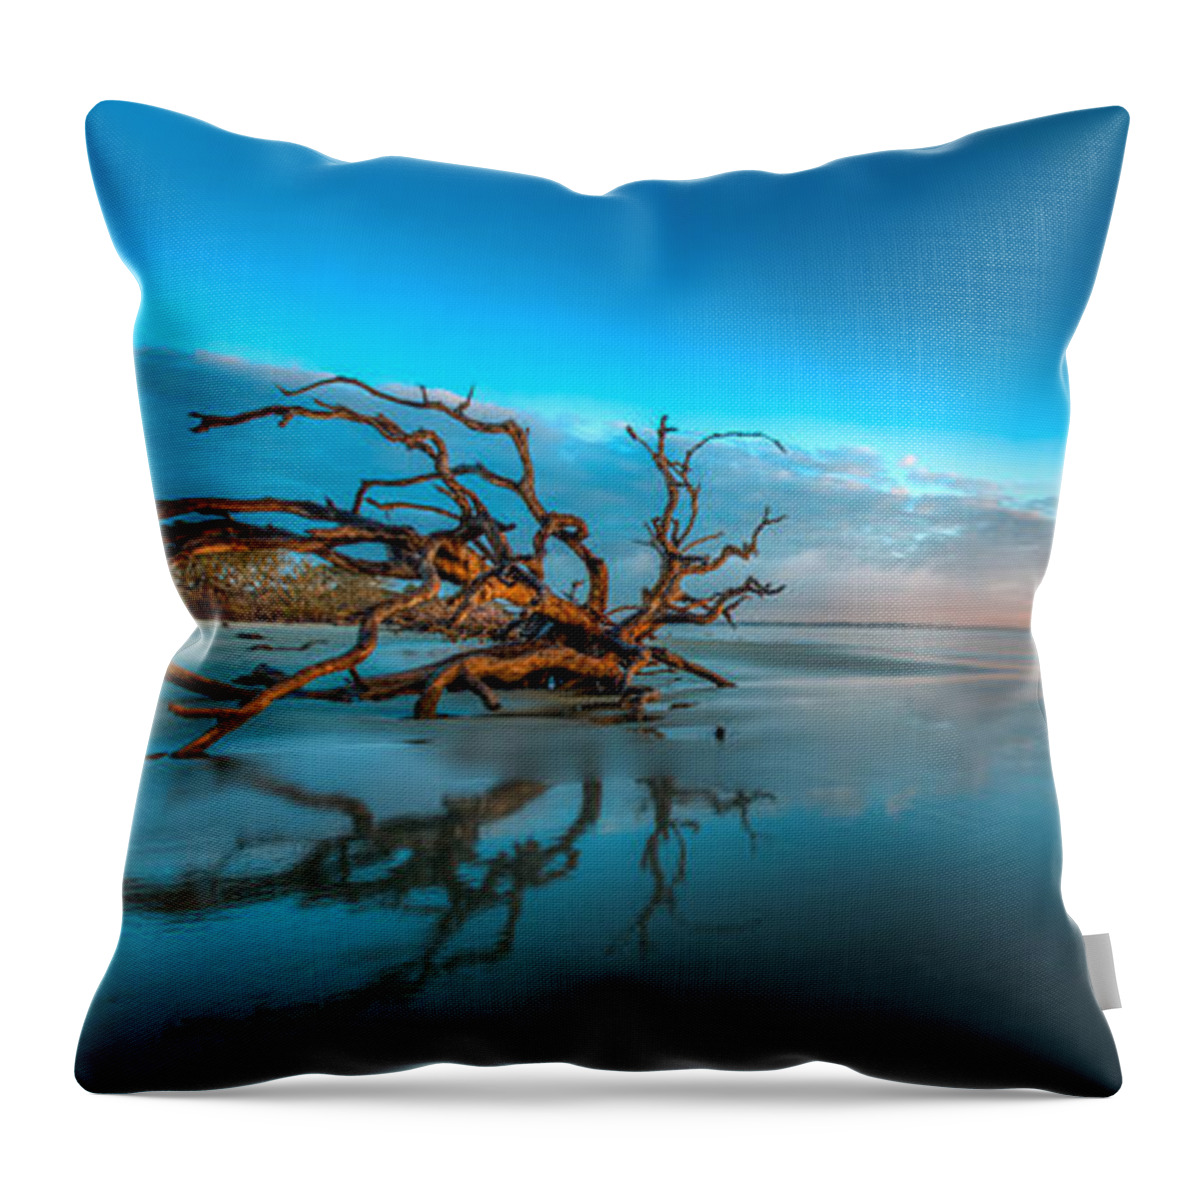 Panorama Throw Pillow featuring the photograph Glowing Dawn Panorama by Debra and Dave Vanderlaan